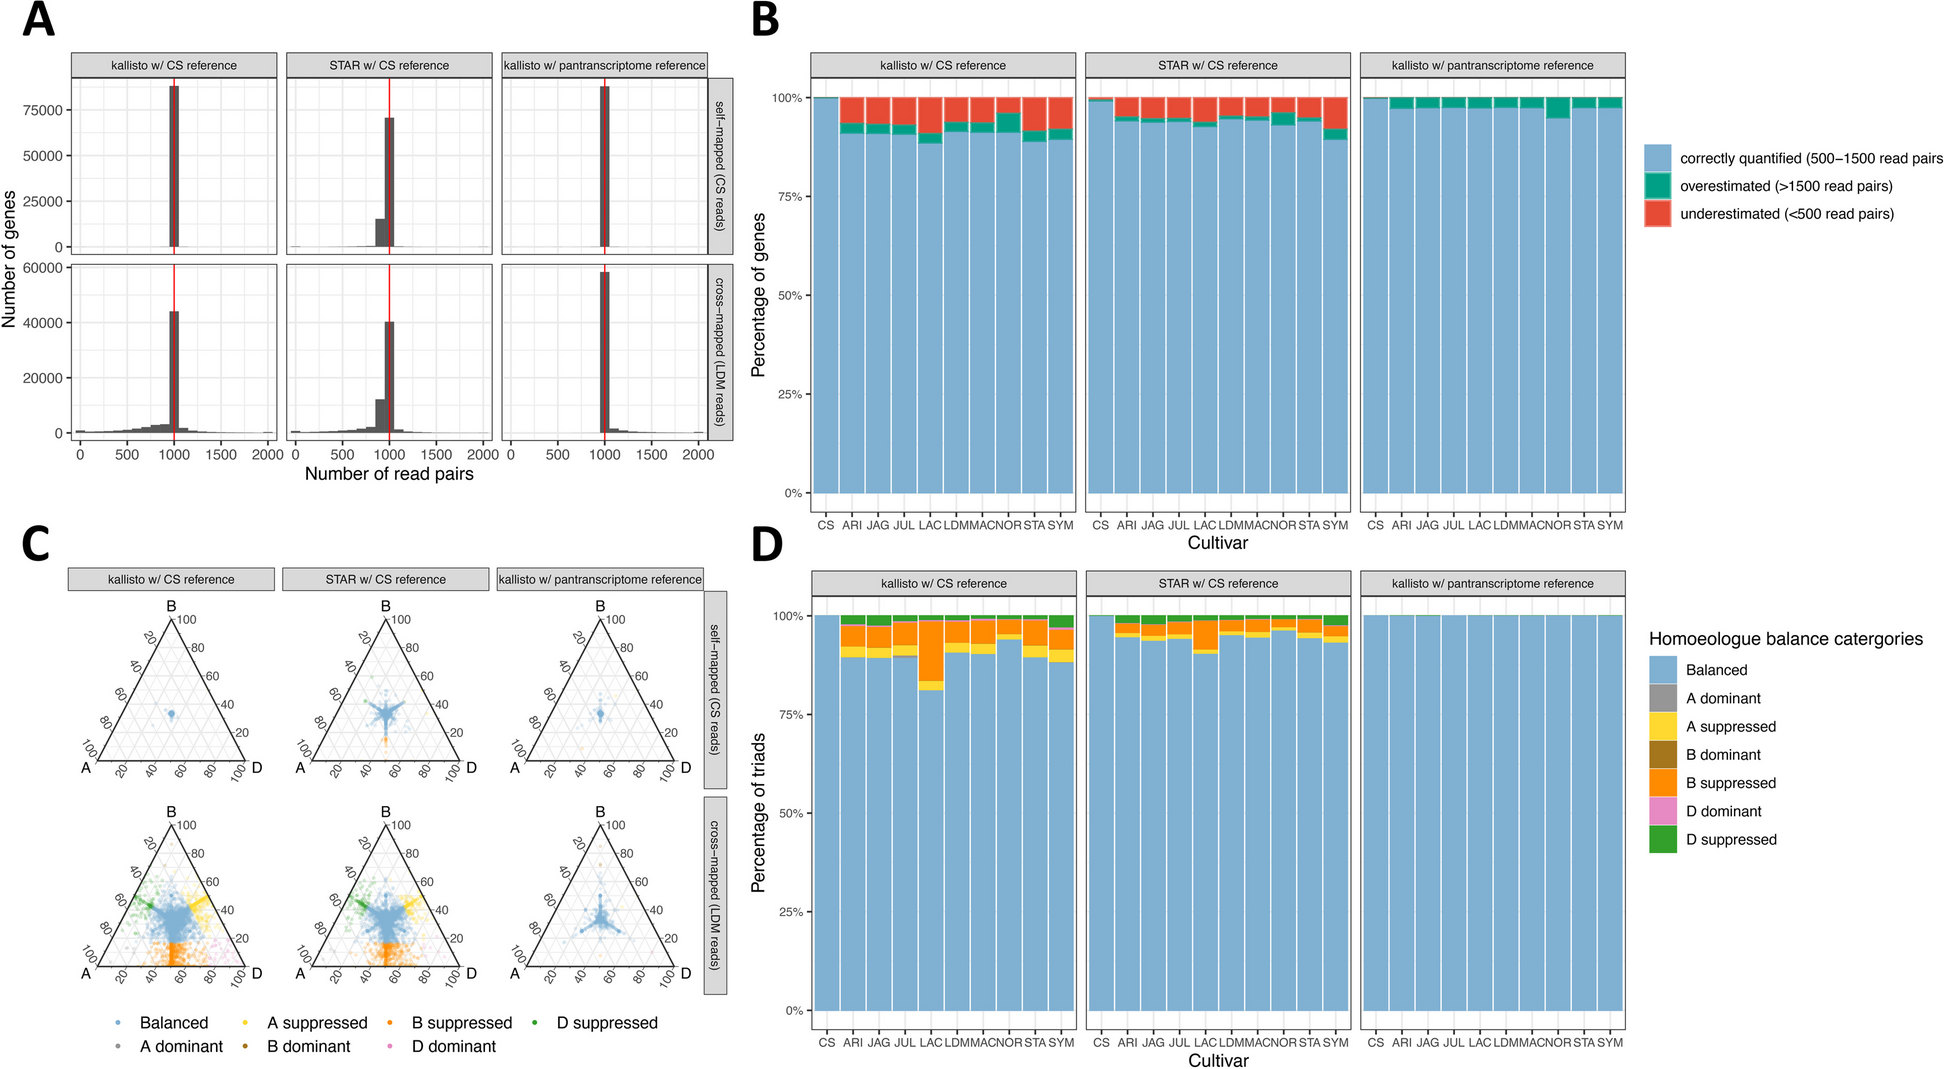 Introgressions lead to reference bias in wheat RNA-seq analysis